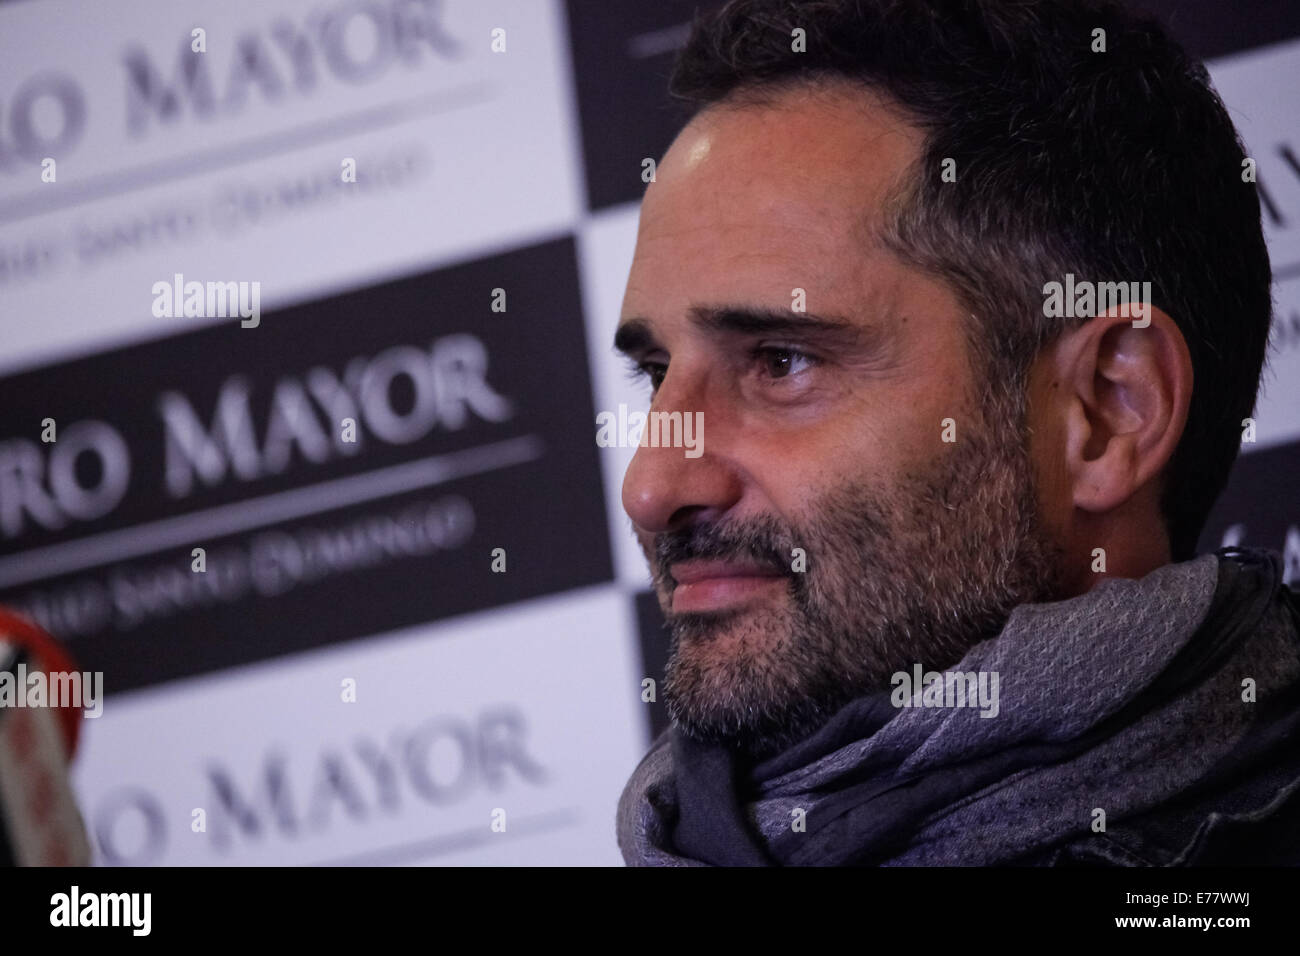 Bogota, Colombia. 8th Sep, 2014. Uruguayan composer and singer Jorge Drexler attends a press briefing in Bogota, Colombia, on Sept. 8, 2014. Jorge Drexler, who won the Oscar award for the Best Original Song in the movie 'Diarios de Motocicleta' (The Motorcycle Diaries), is in Bogota to perform on two presentations Sept. 9-10 at Julio Mario Santo Domingo Theater. © Jhon Paz/Xinhua/Alamy Live News Stock Photo